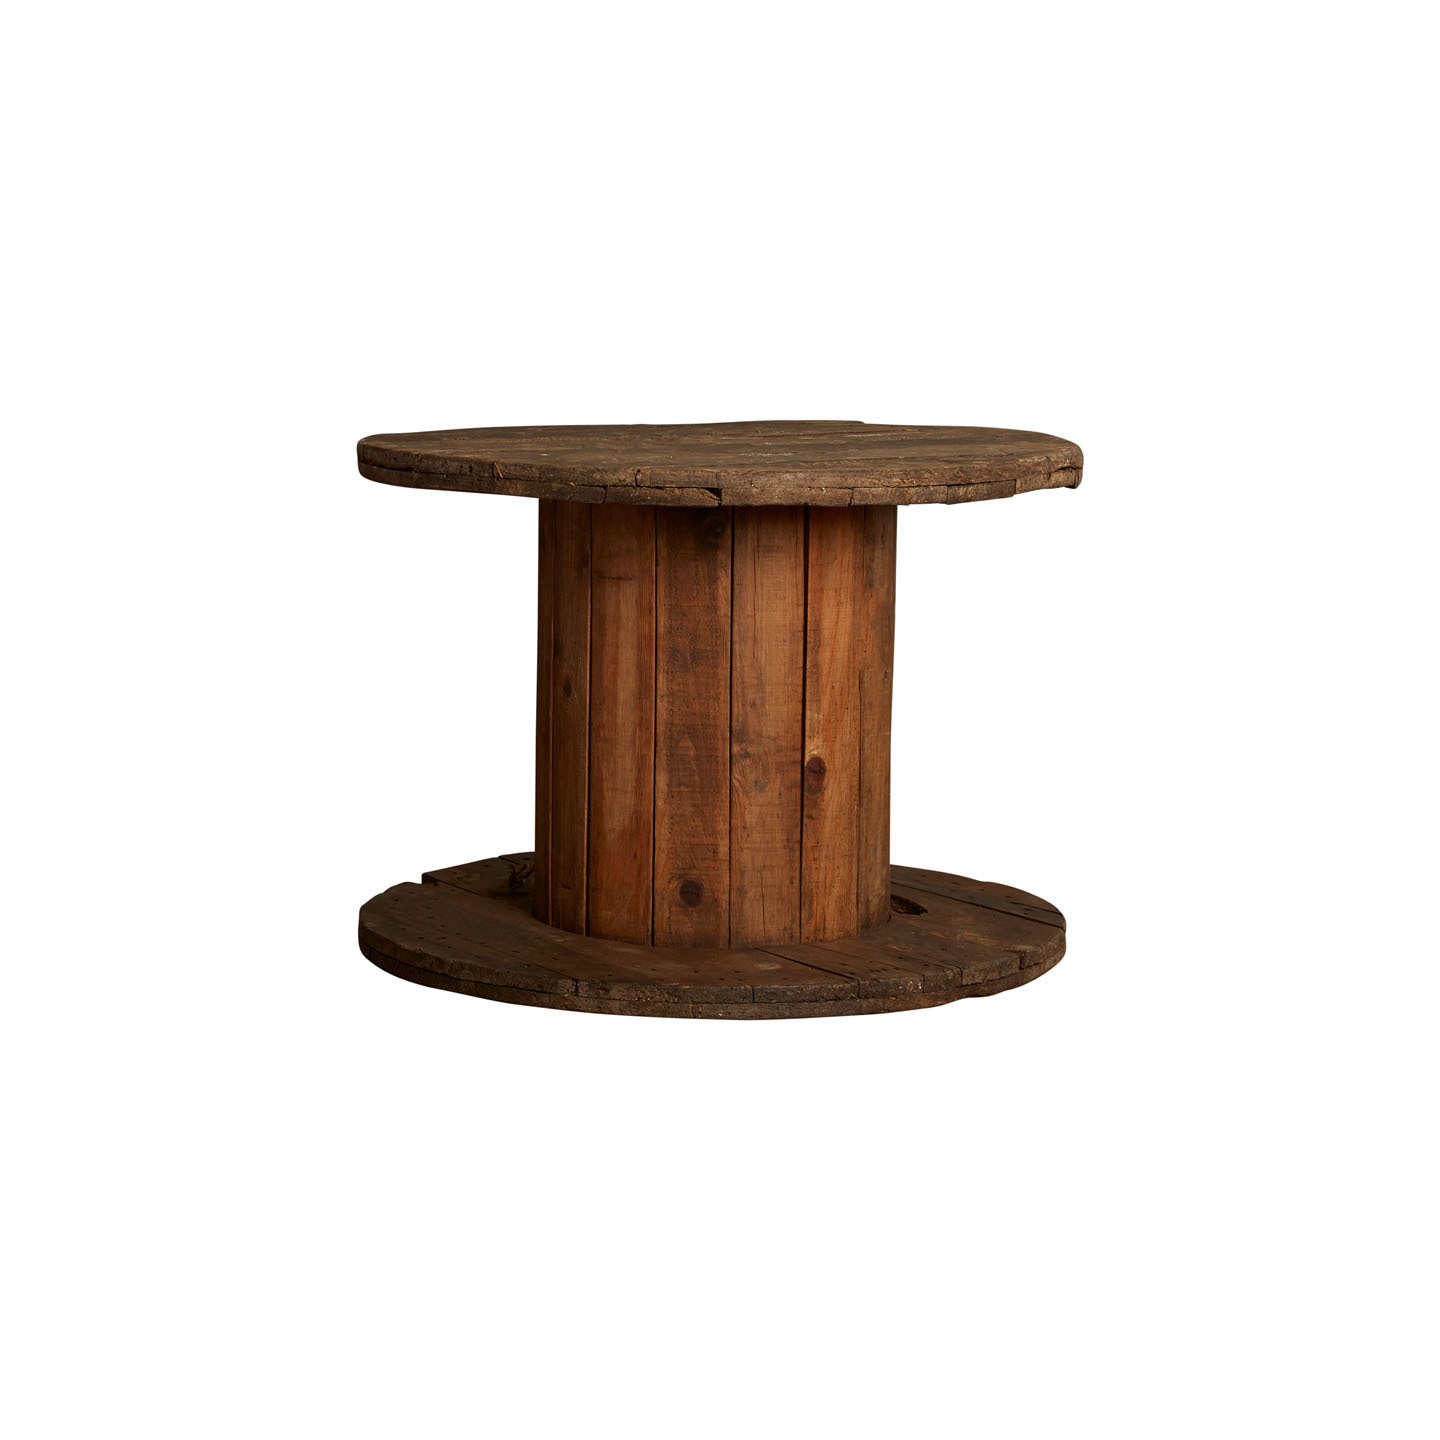 Cotton Reel Tables for Hire - Event Furniture by Tarren